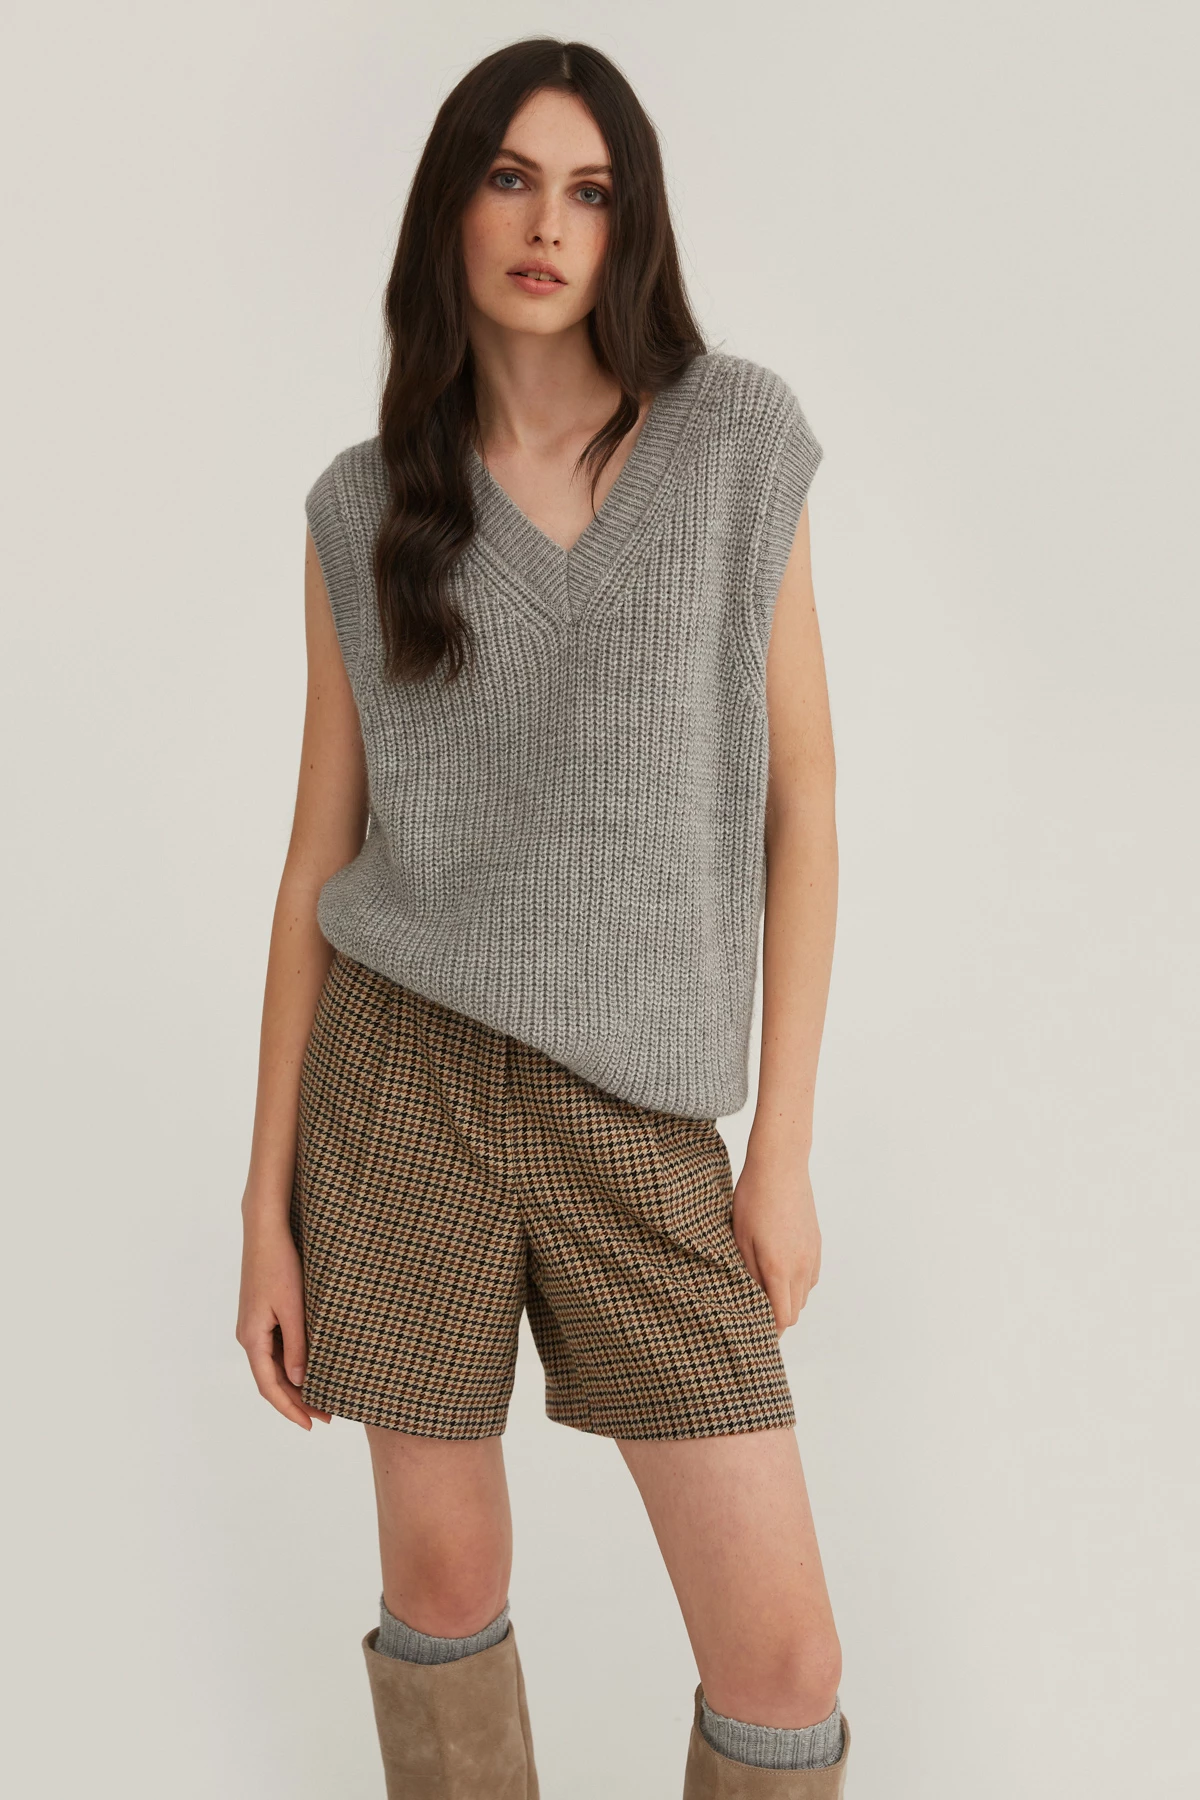 Straight-cut elongetaed shorts in houndstooth pattern with wool, photo 1